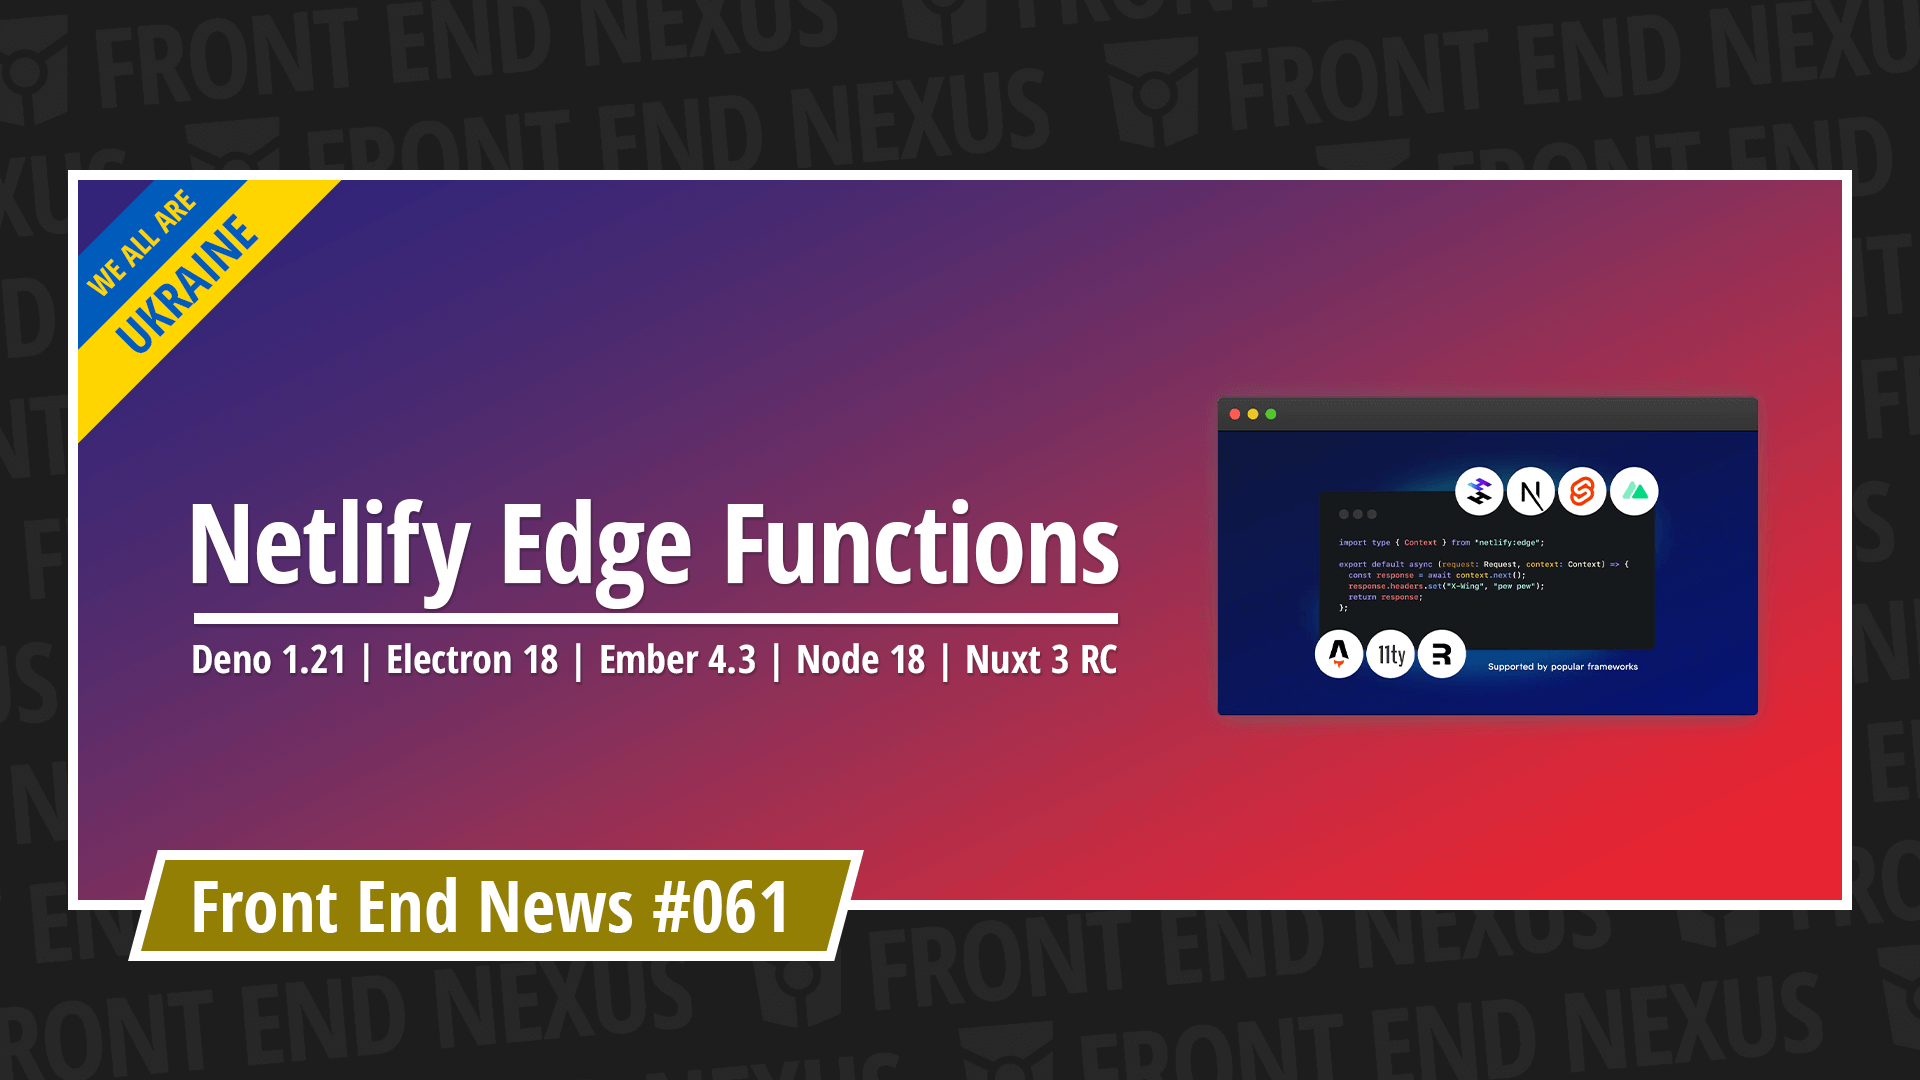 Netlify launched Edge Functions, Deno 1.21, Electron 18, Ember 4.3, Node 18, Nuxt 3 RC, and more | Front End News #061